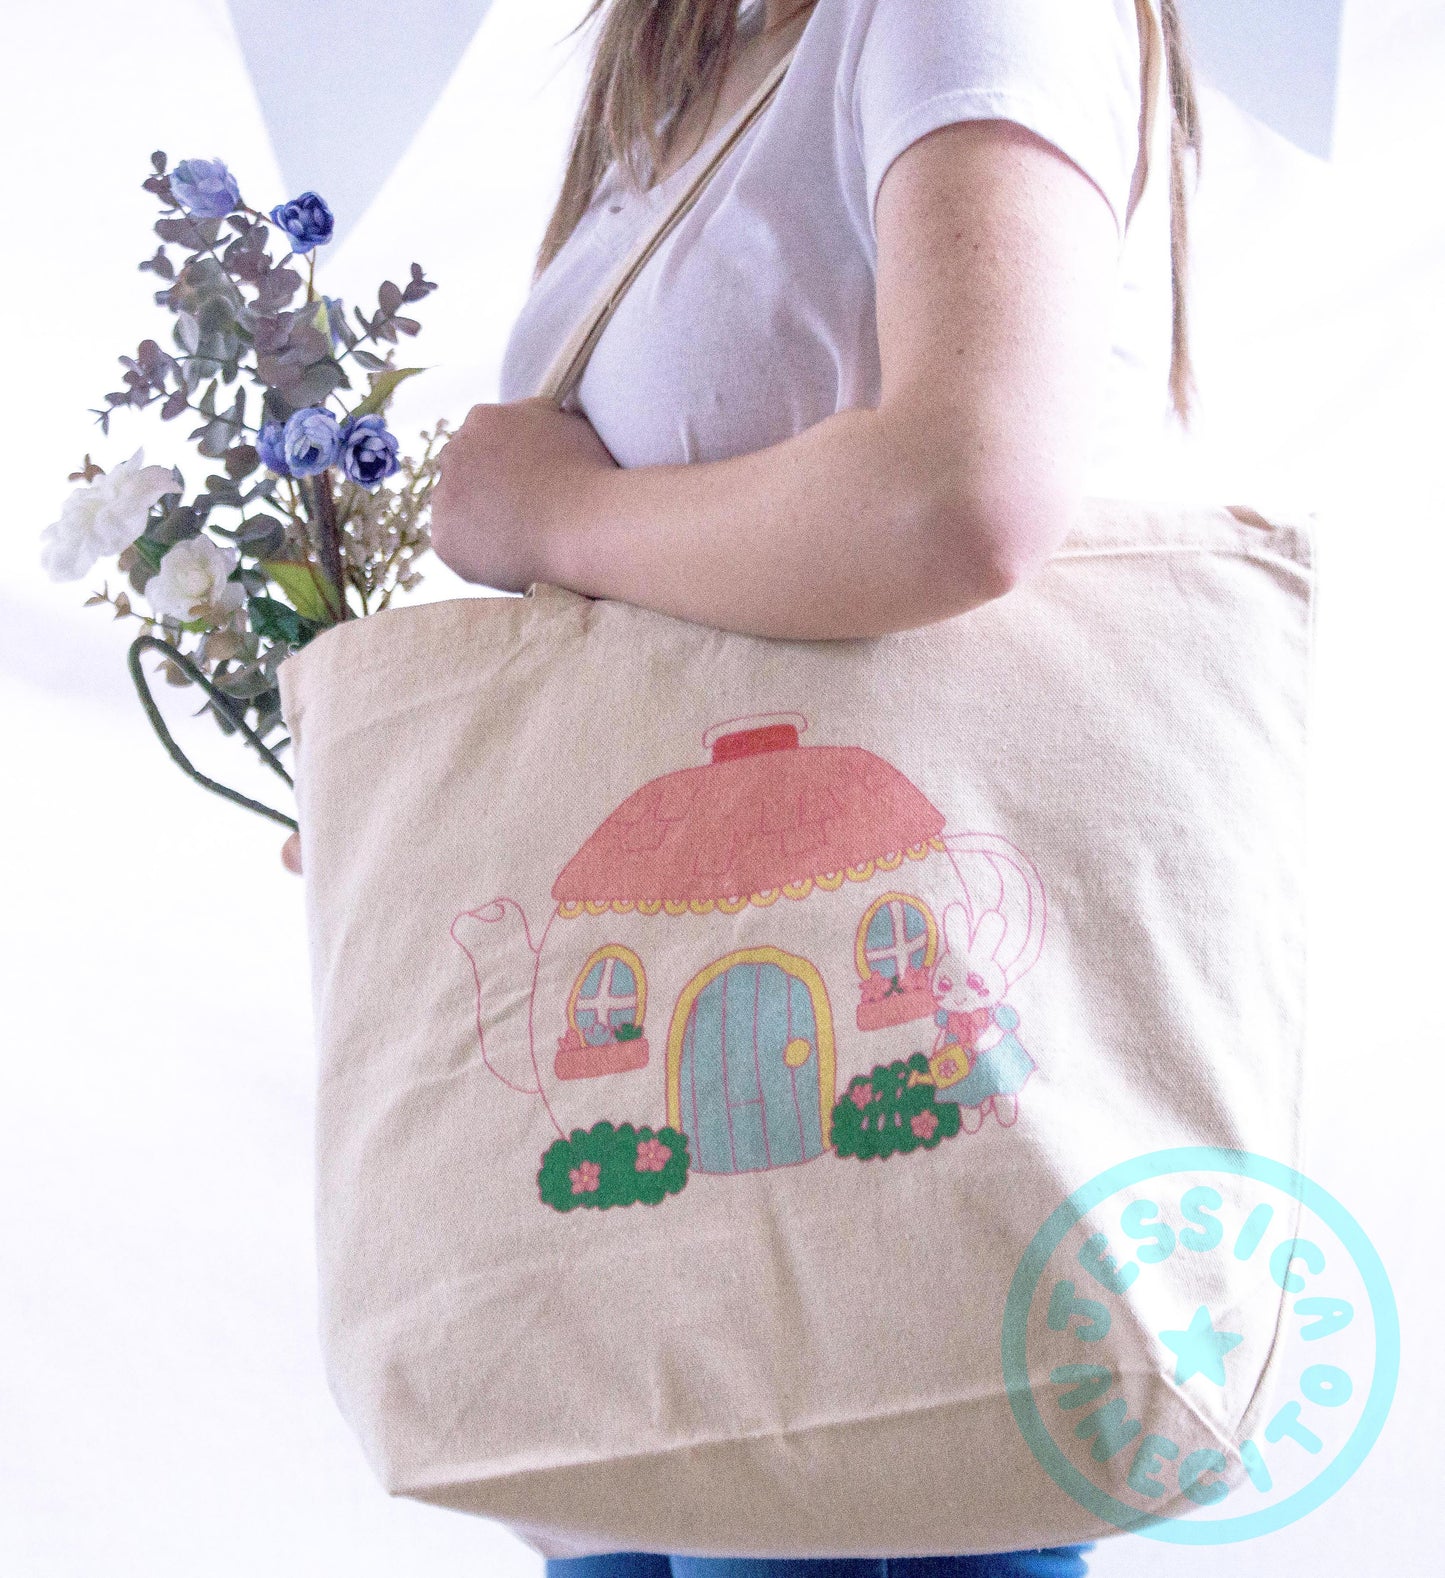 A female presenting person is standing at an angle holding a canvas tote bag over one shoulder. The bag is covering most of the body and has some purple and white flowers sticking out of it. On the side of the bag is an illustration of a bunny, standing like a person and wearing a blue dress with round sleeves, watering a bush. The bush has flowers on it and is front of a teapot that has been made into a house, with a door on the side and two small round windows. 